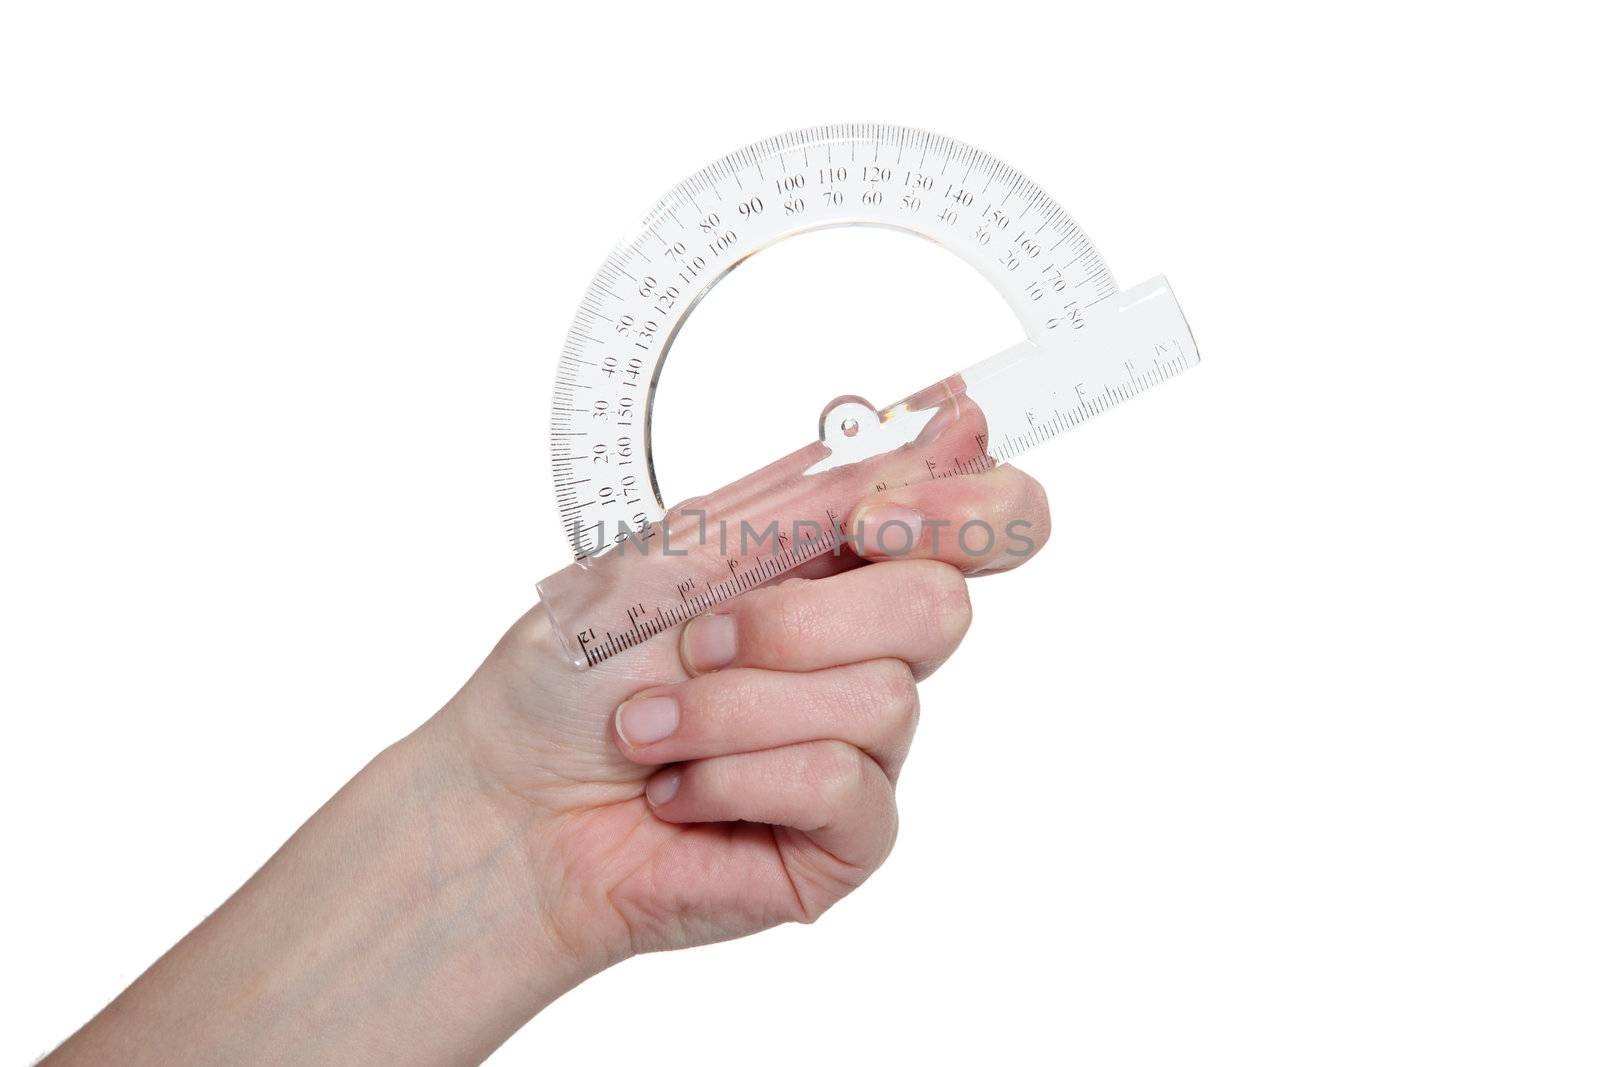 Found my protractor.